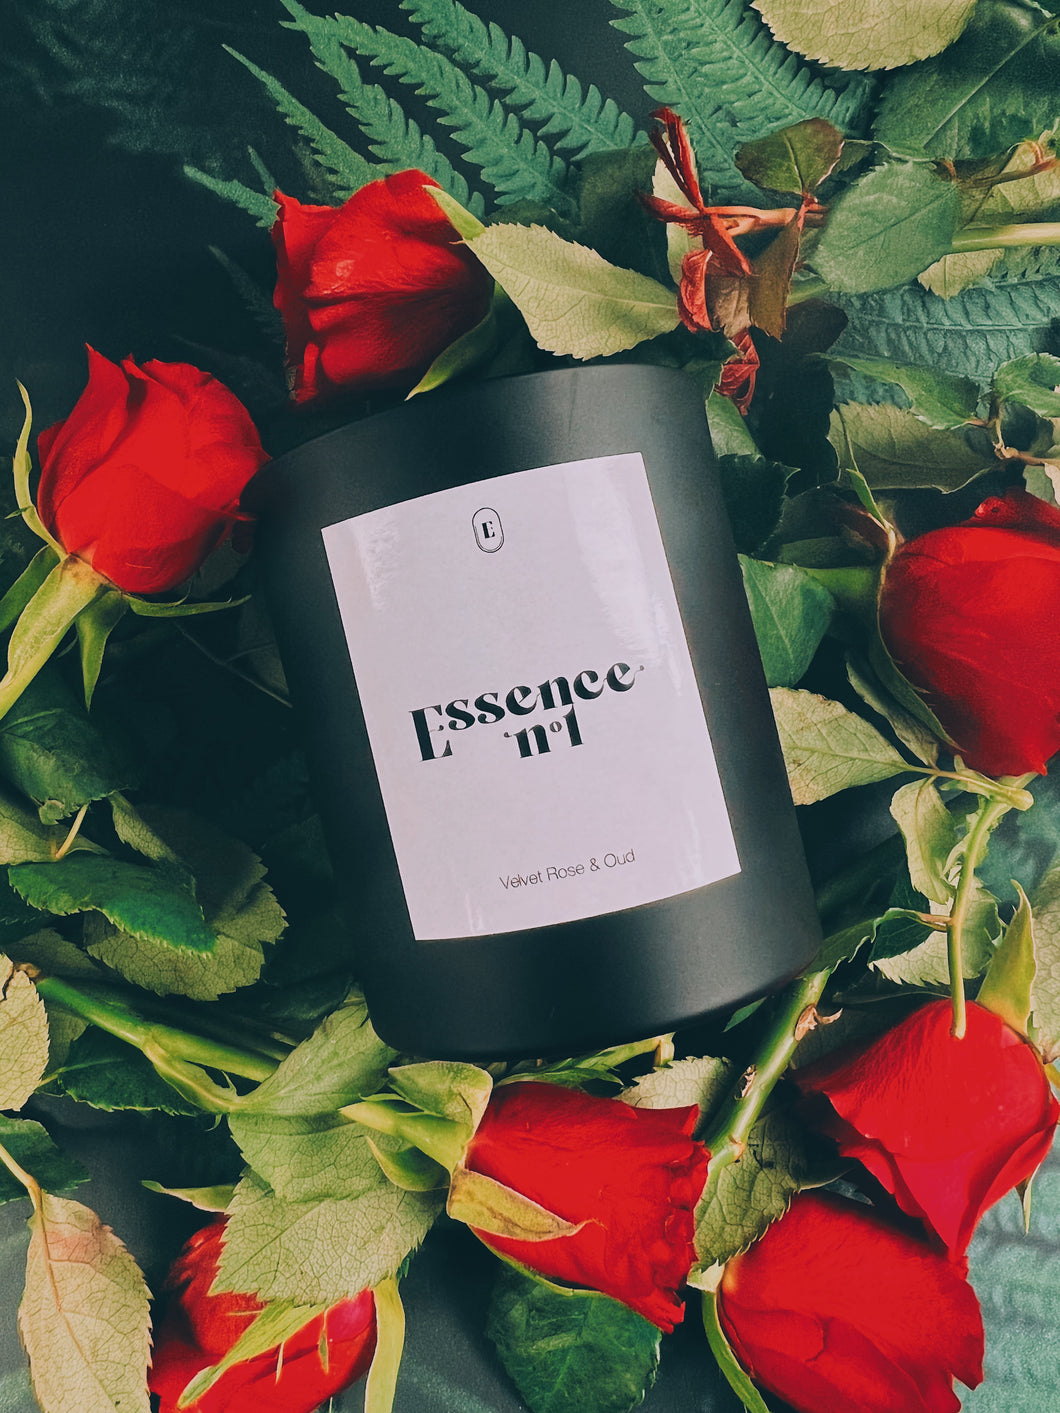 Velvet Rose & Oud Soy Wax Candle